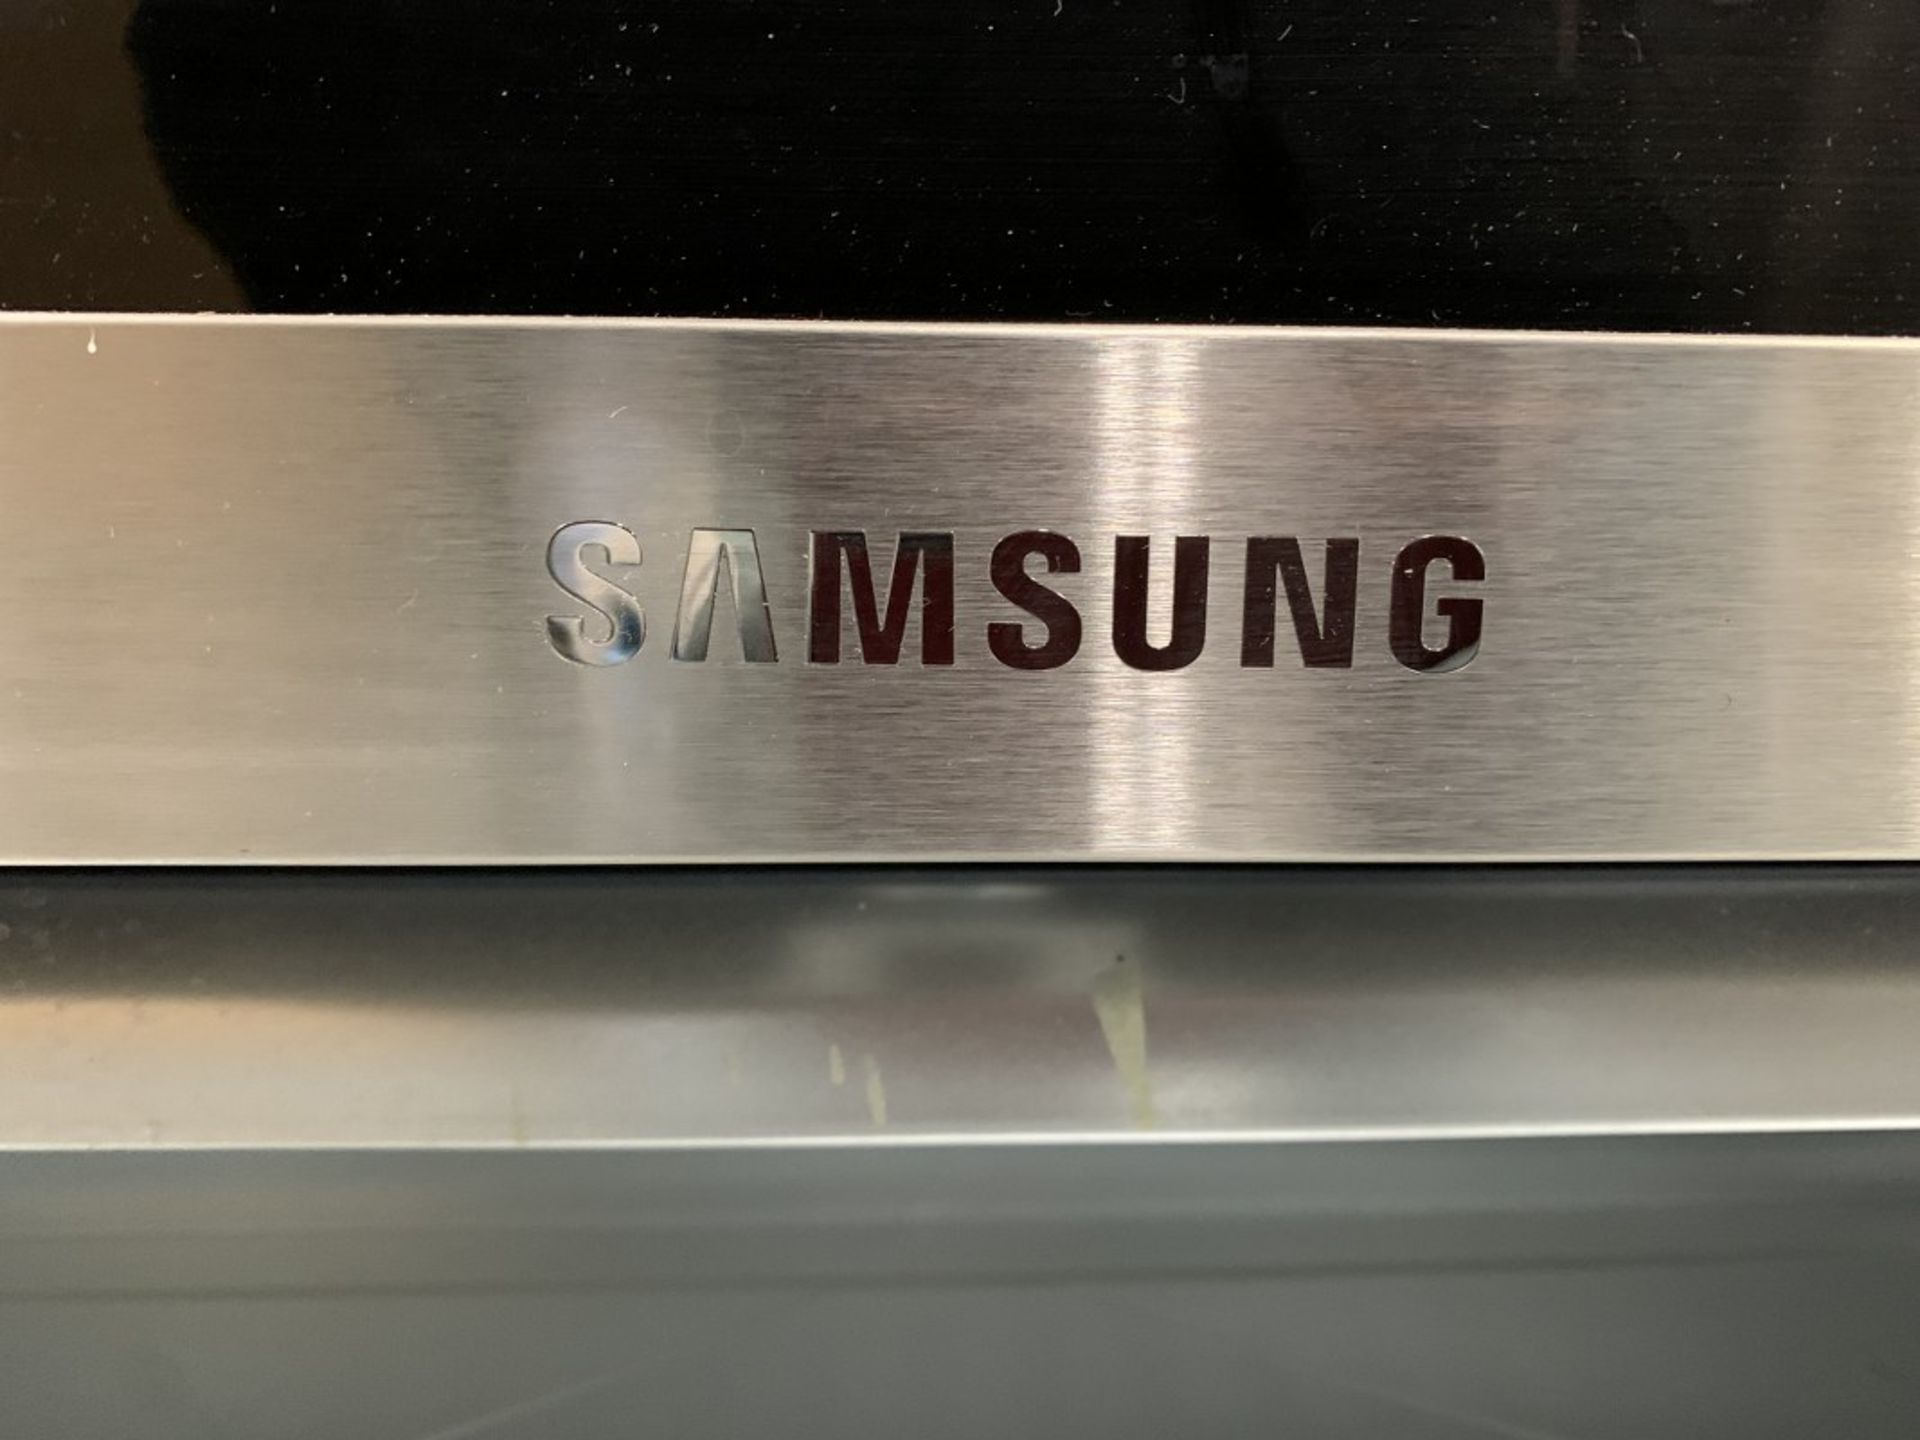 Samsung - Induction Range, 30 Inch Exterior Width, Self Clean, Convection, 4 Burners, 6.3 Cu. Ft. - Image 3 of 5